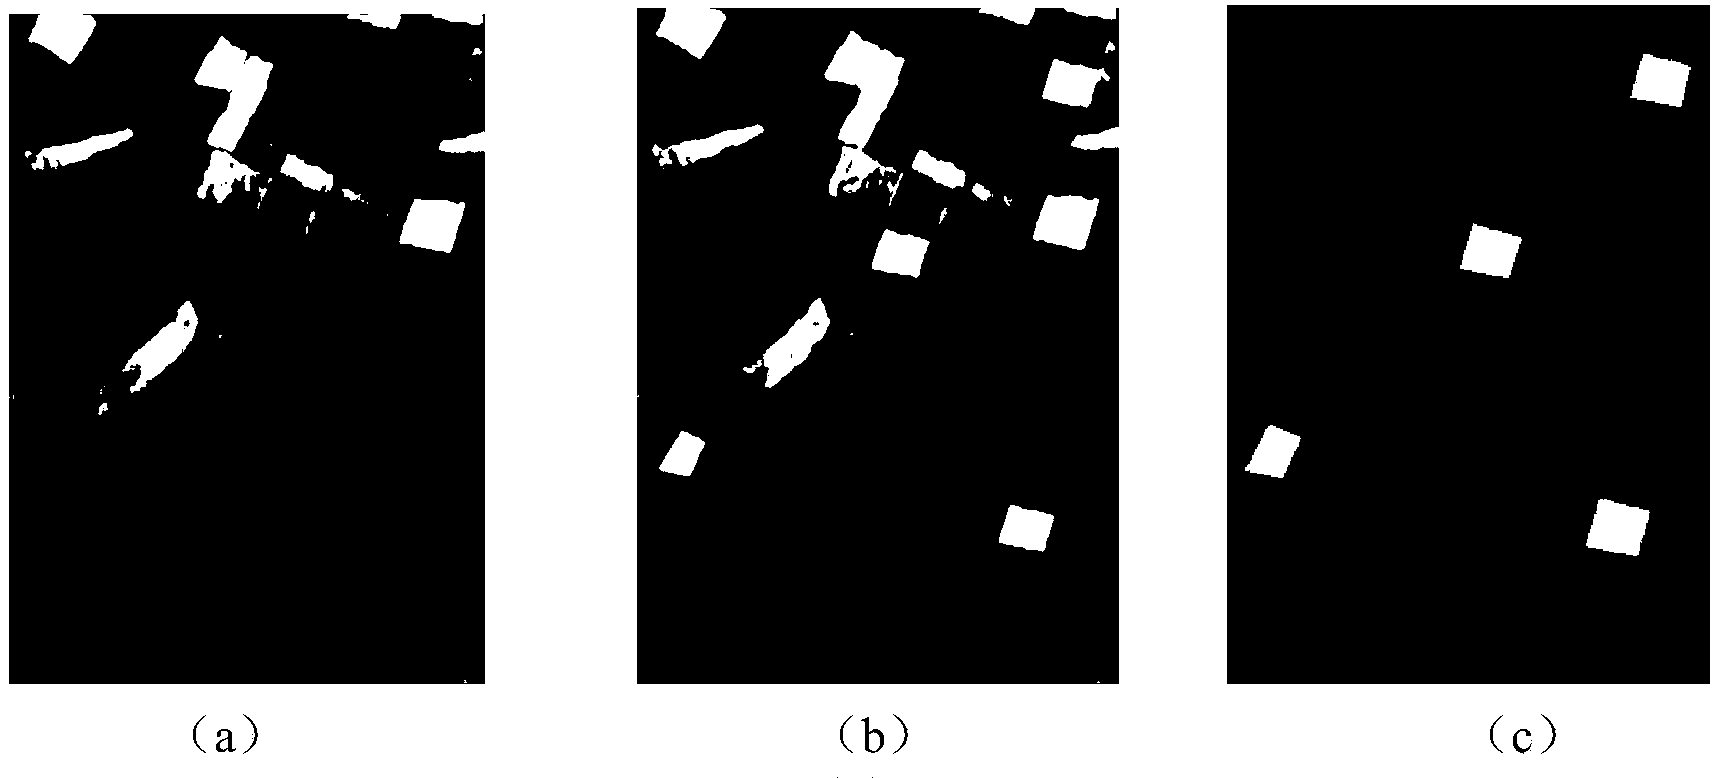 Remote sensing image change detection method based on fusion and PCA kernel fuzzy clustering